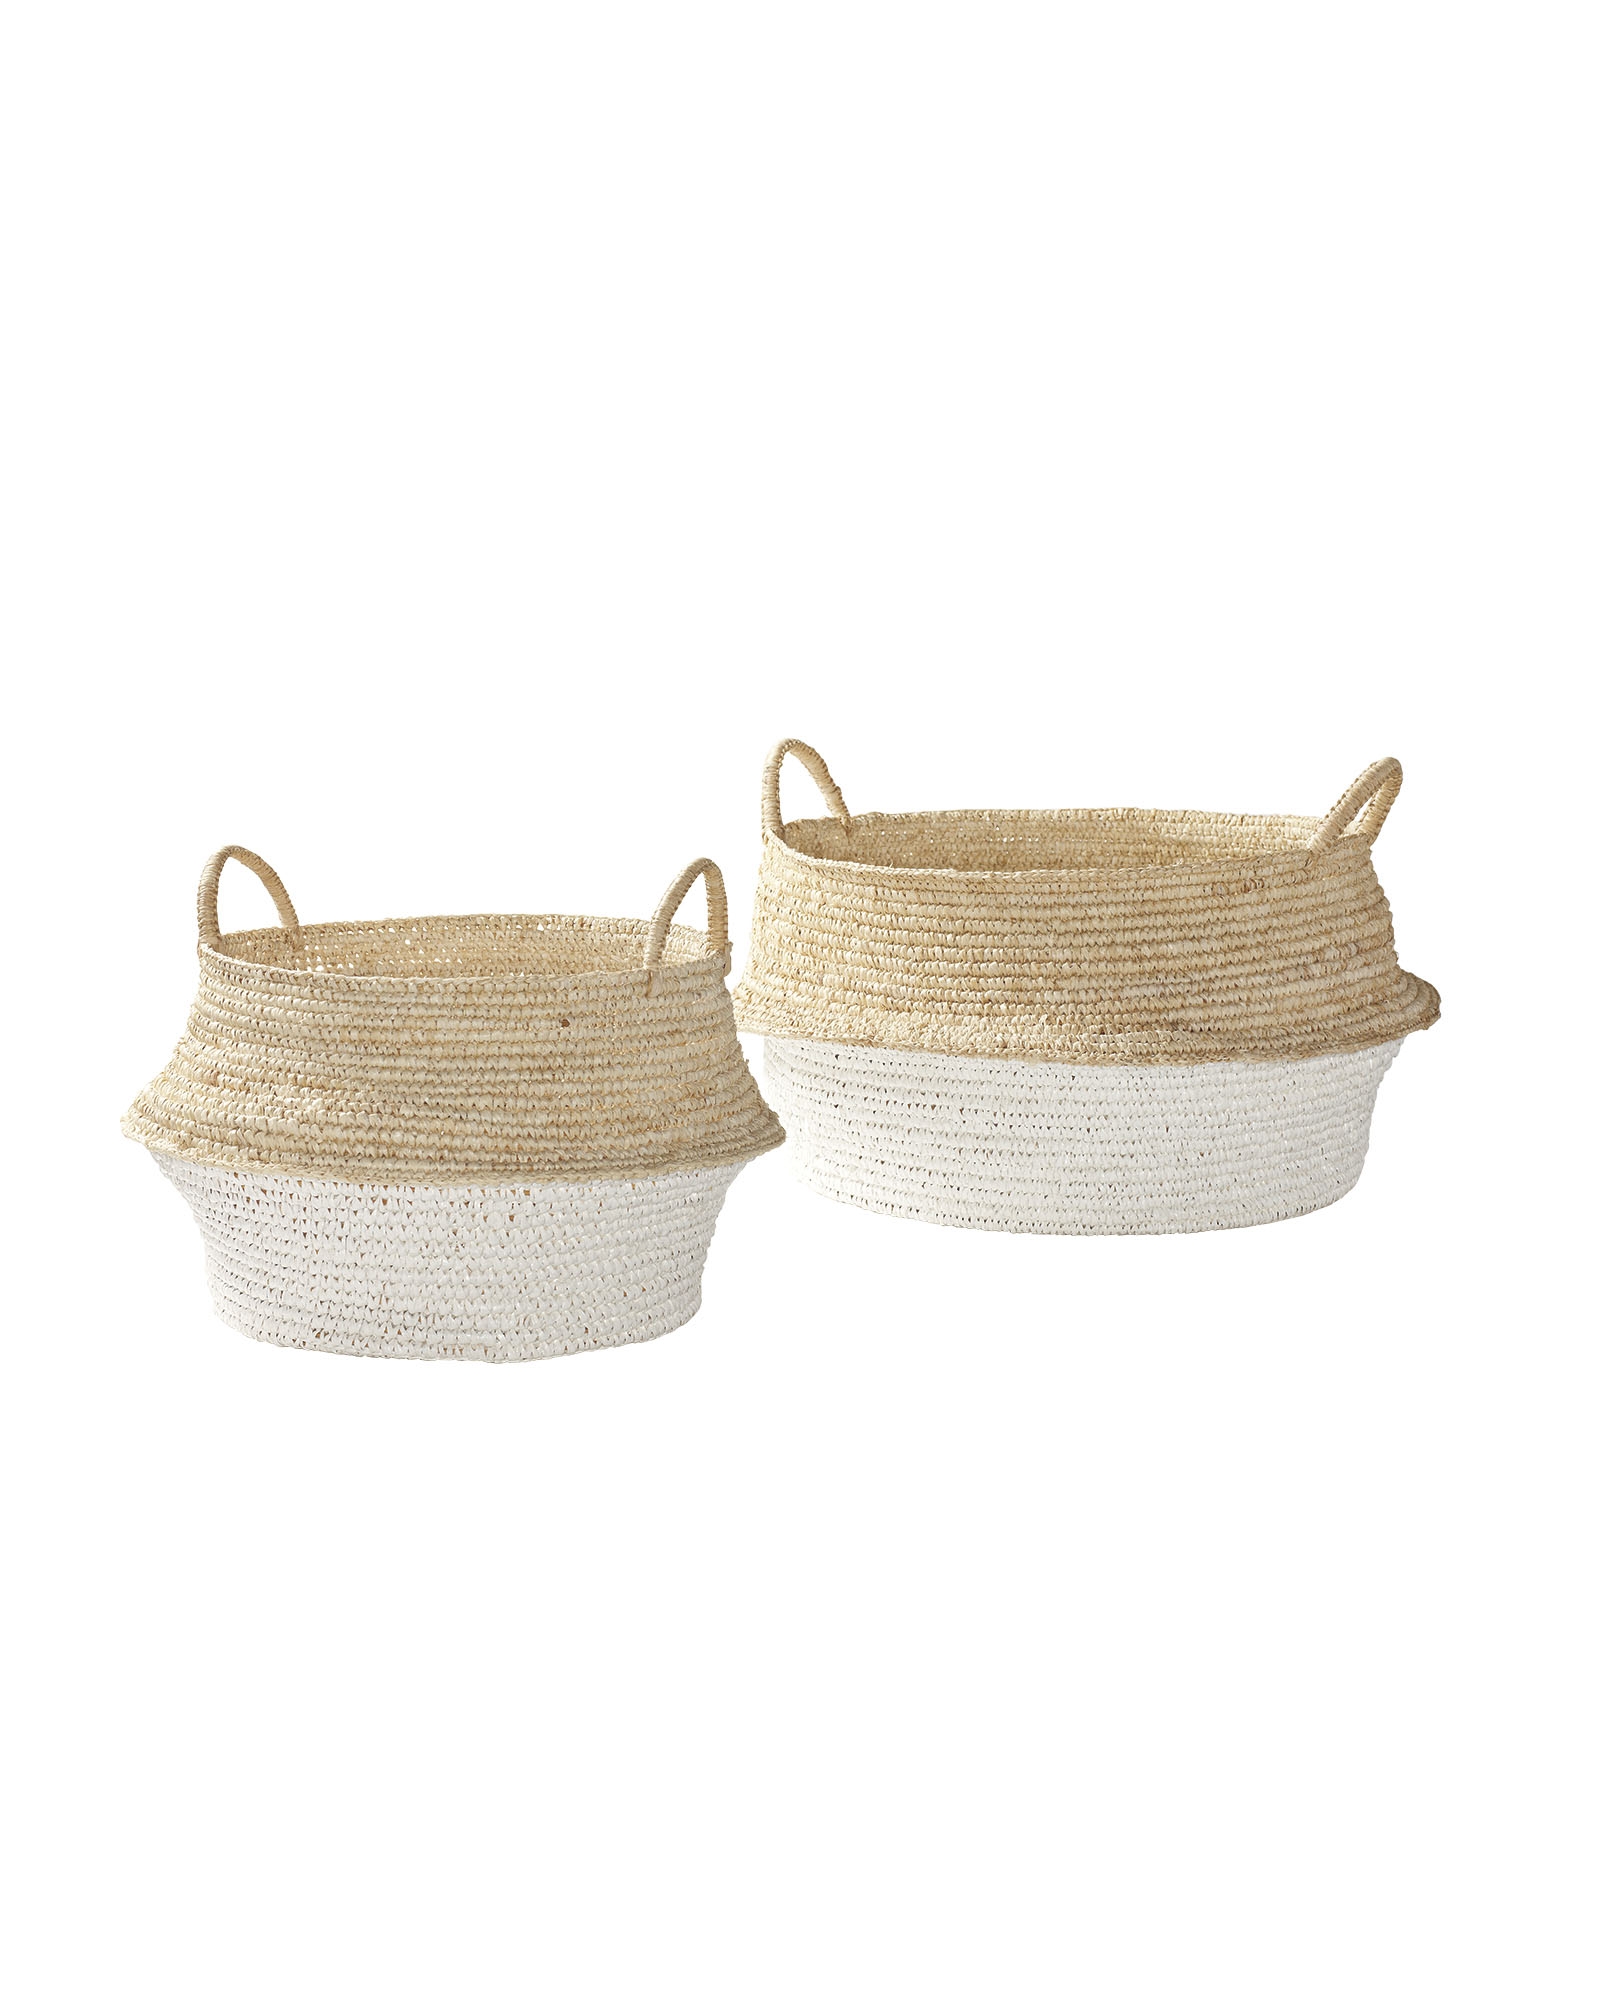 Round Belly Baskets (Set of 2) - Image 0